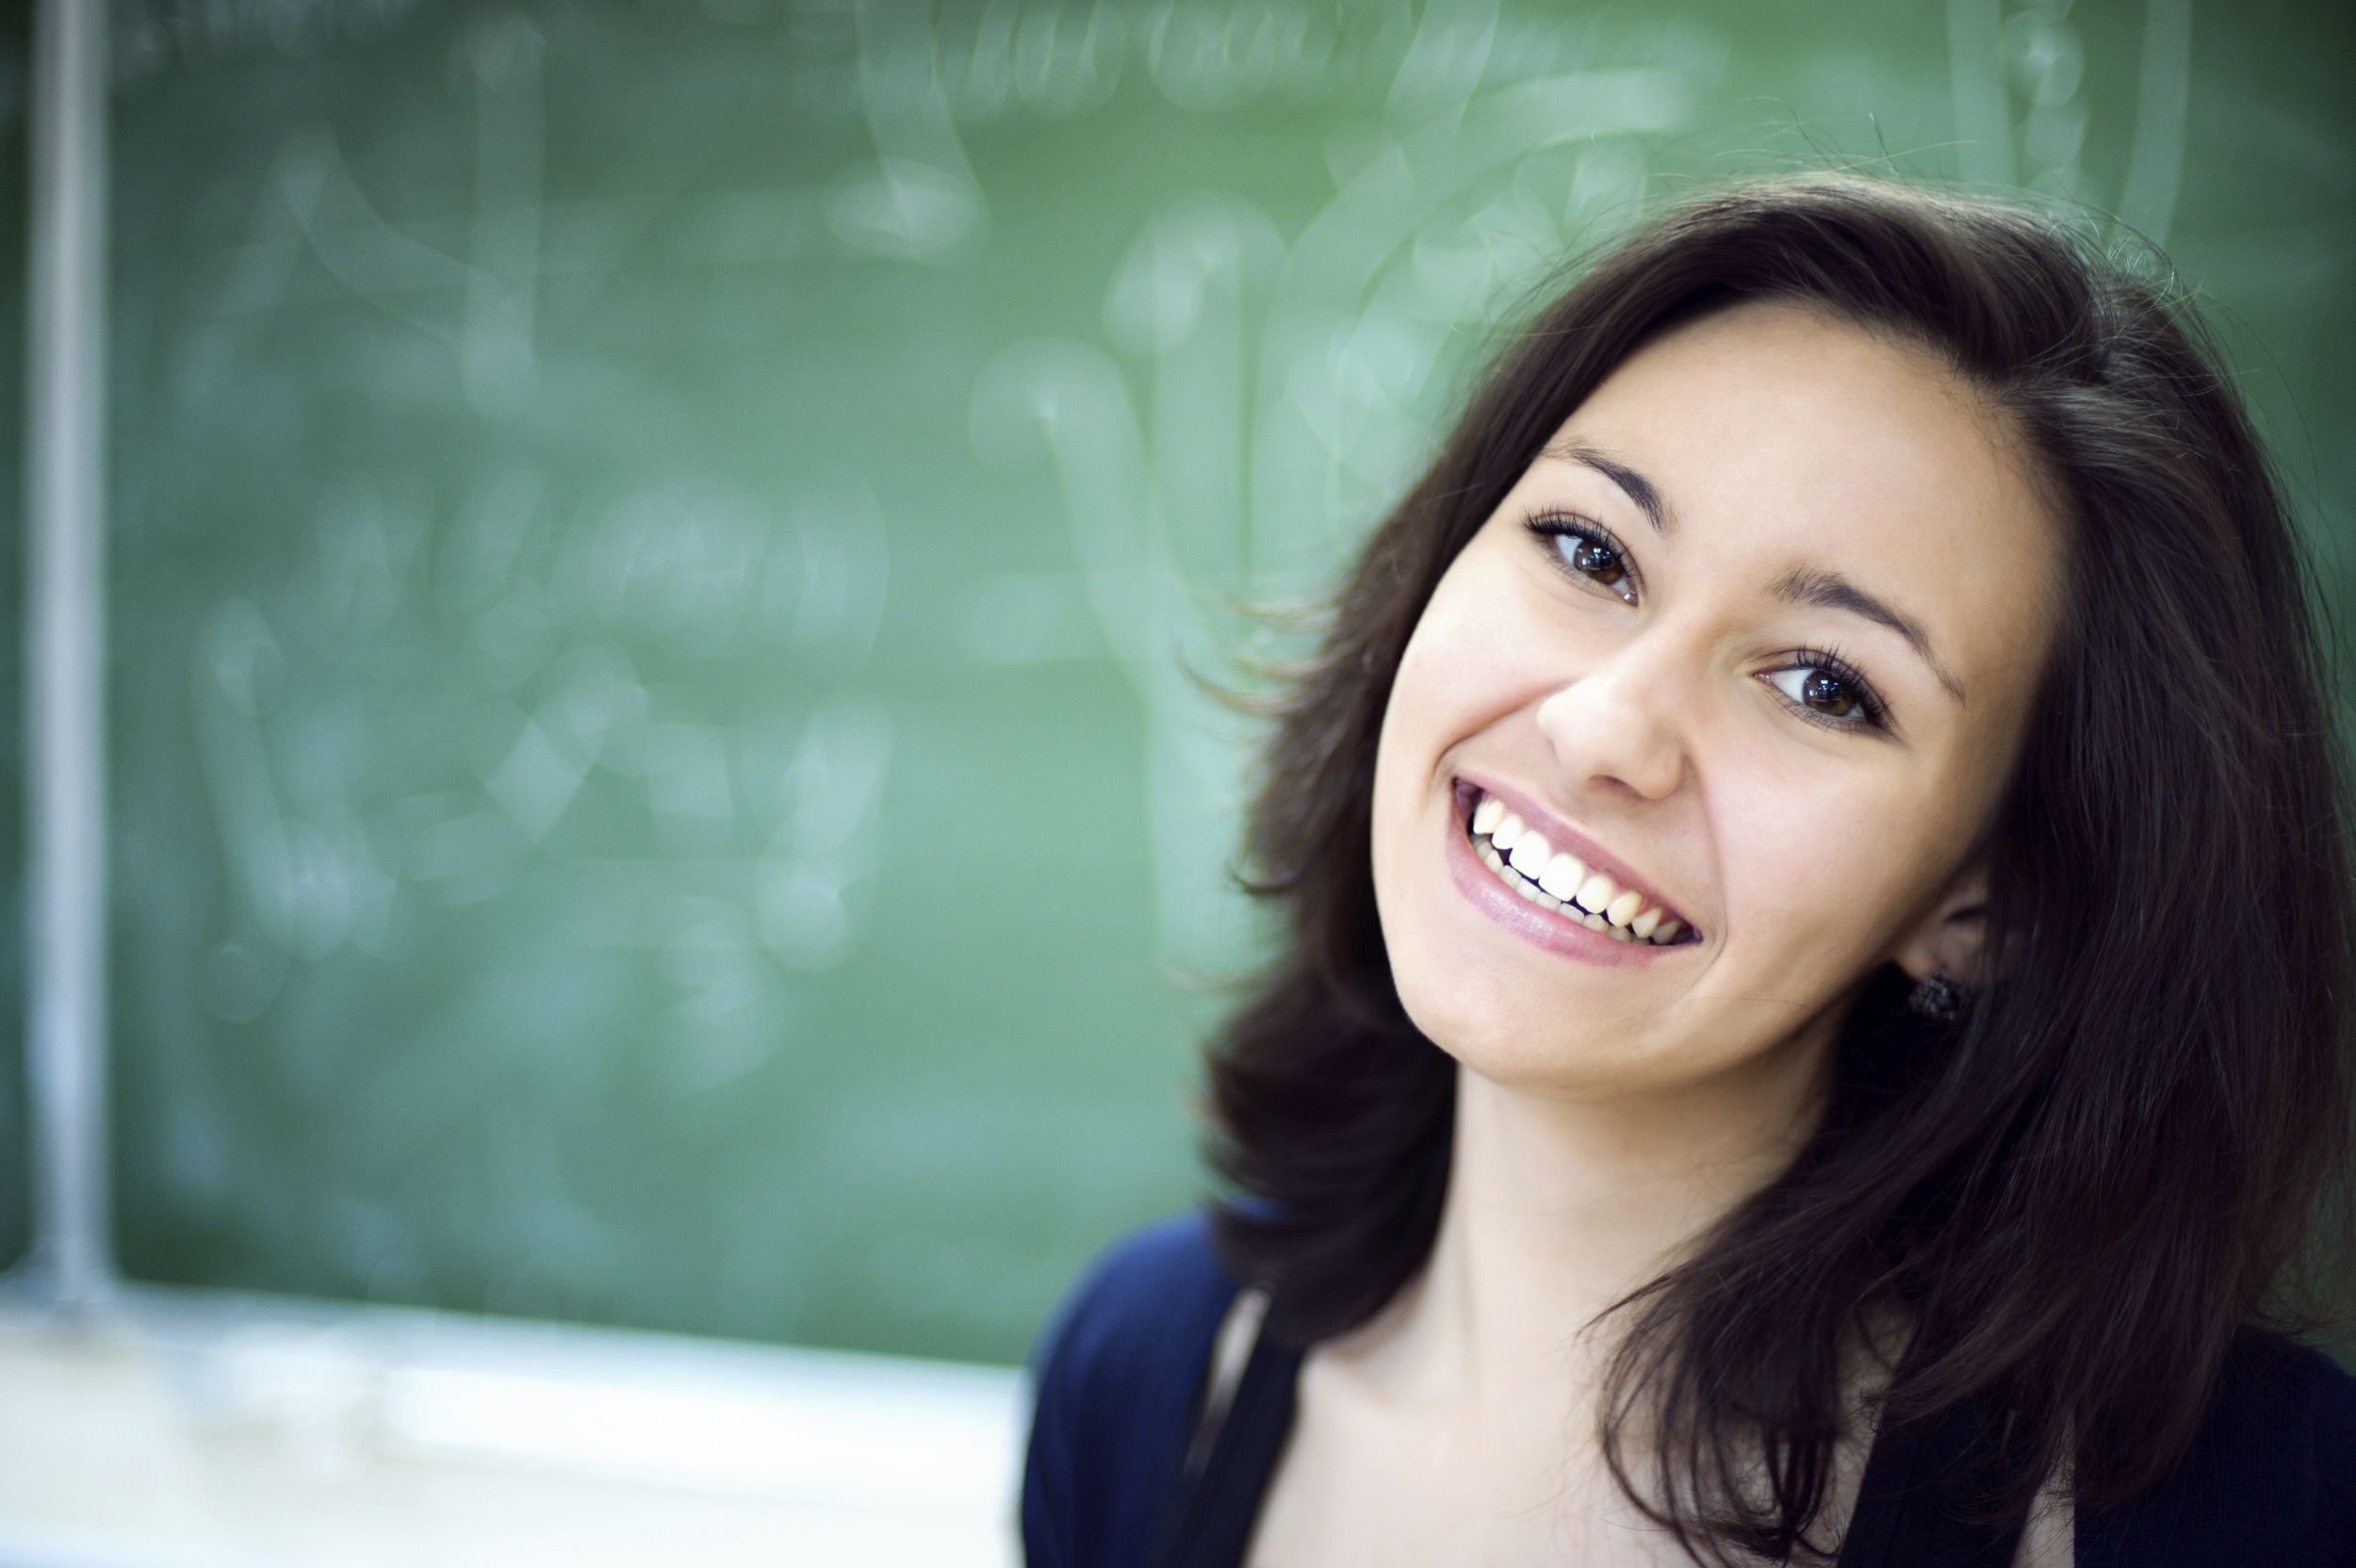 Smiling student who is happy with the advice she was given by student services.